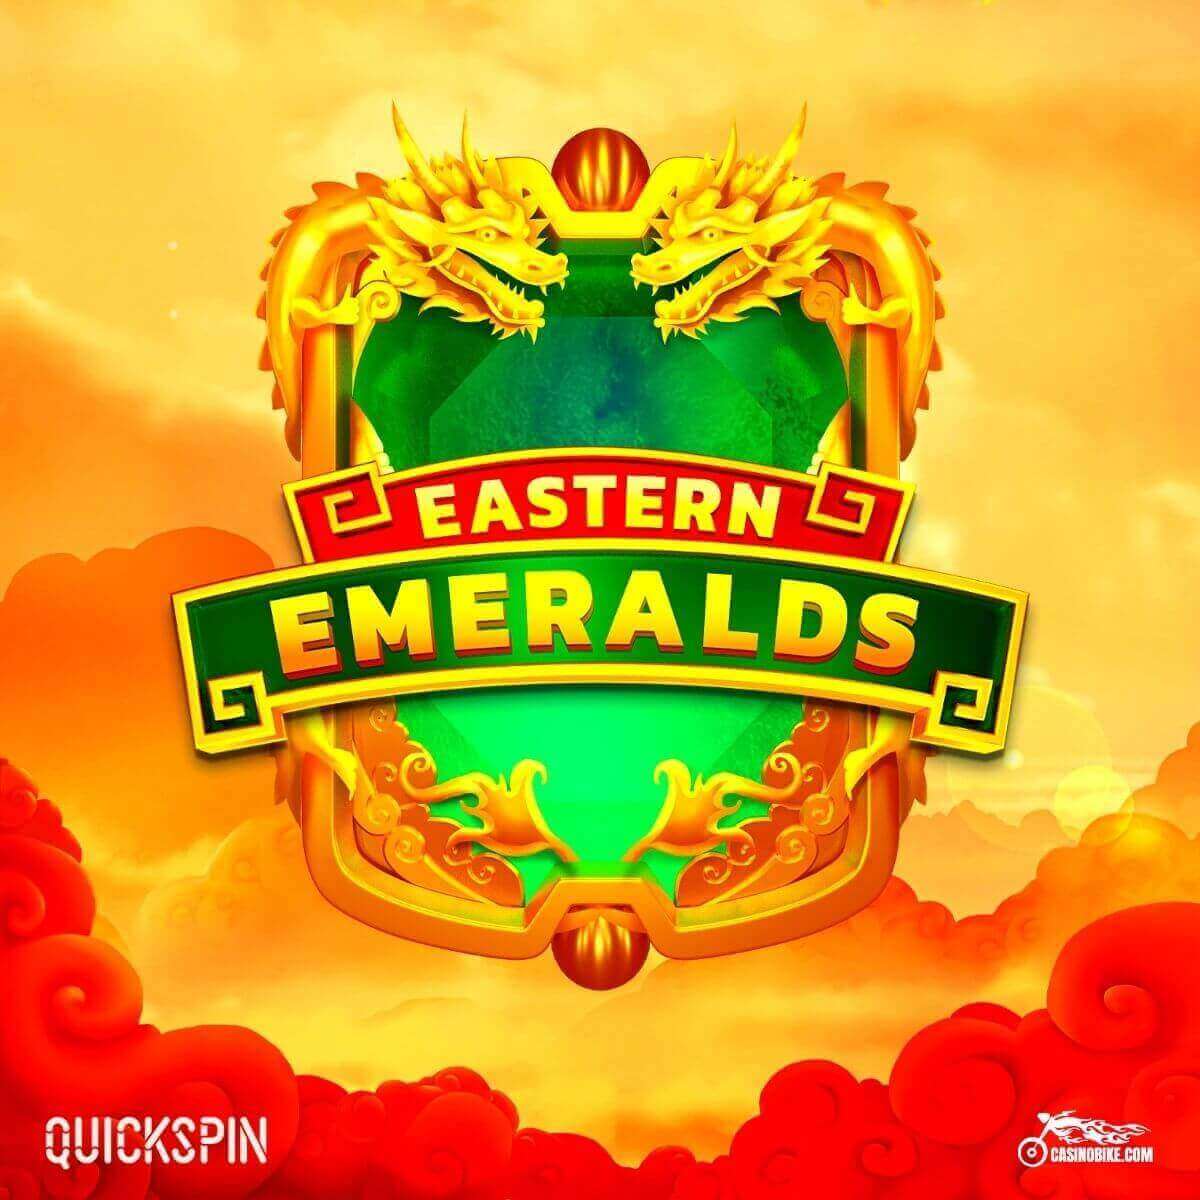 Eastern Emeralds Slot by Quickspin